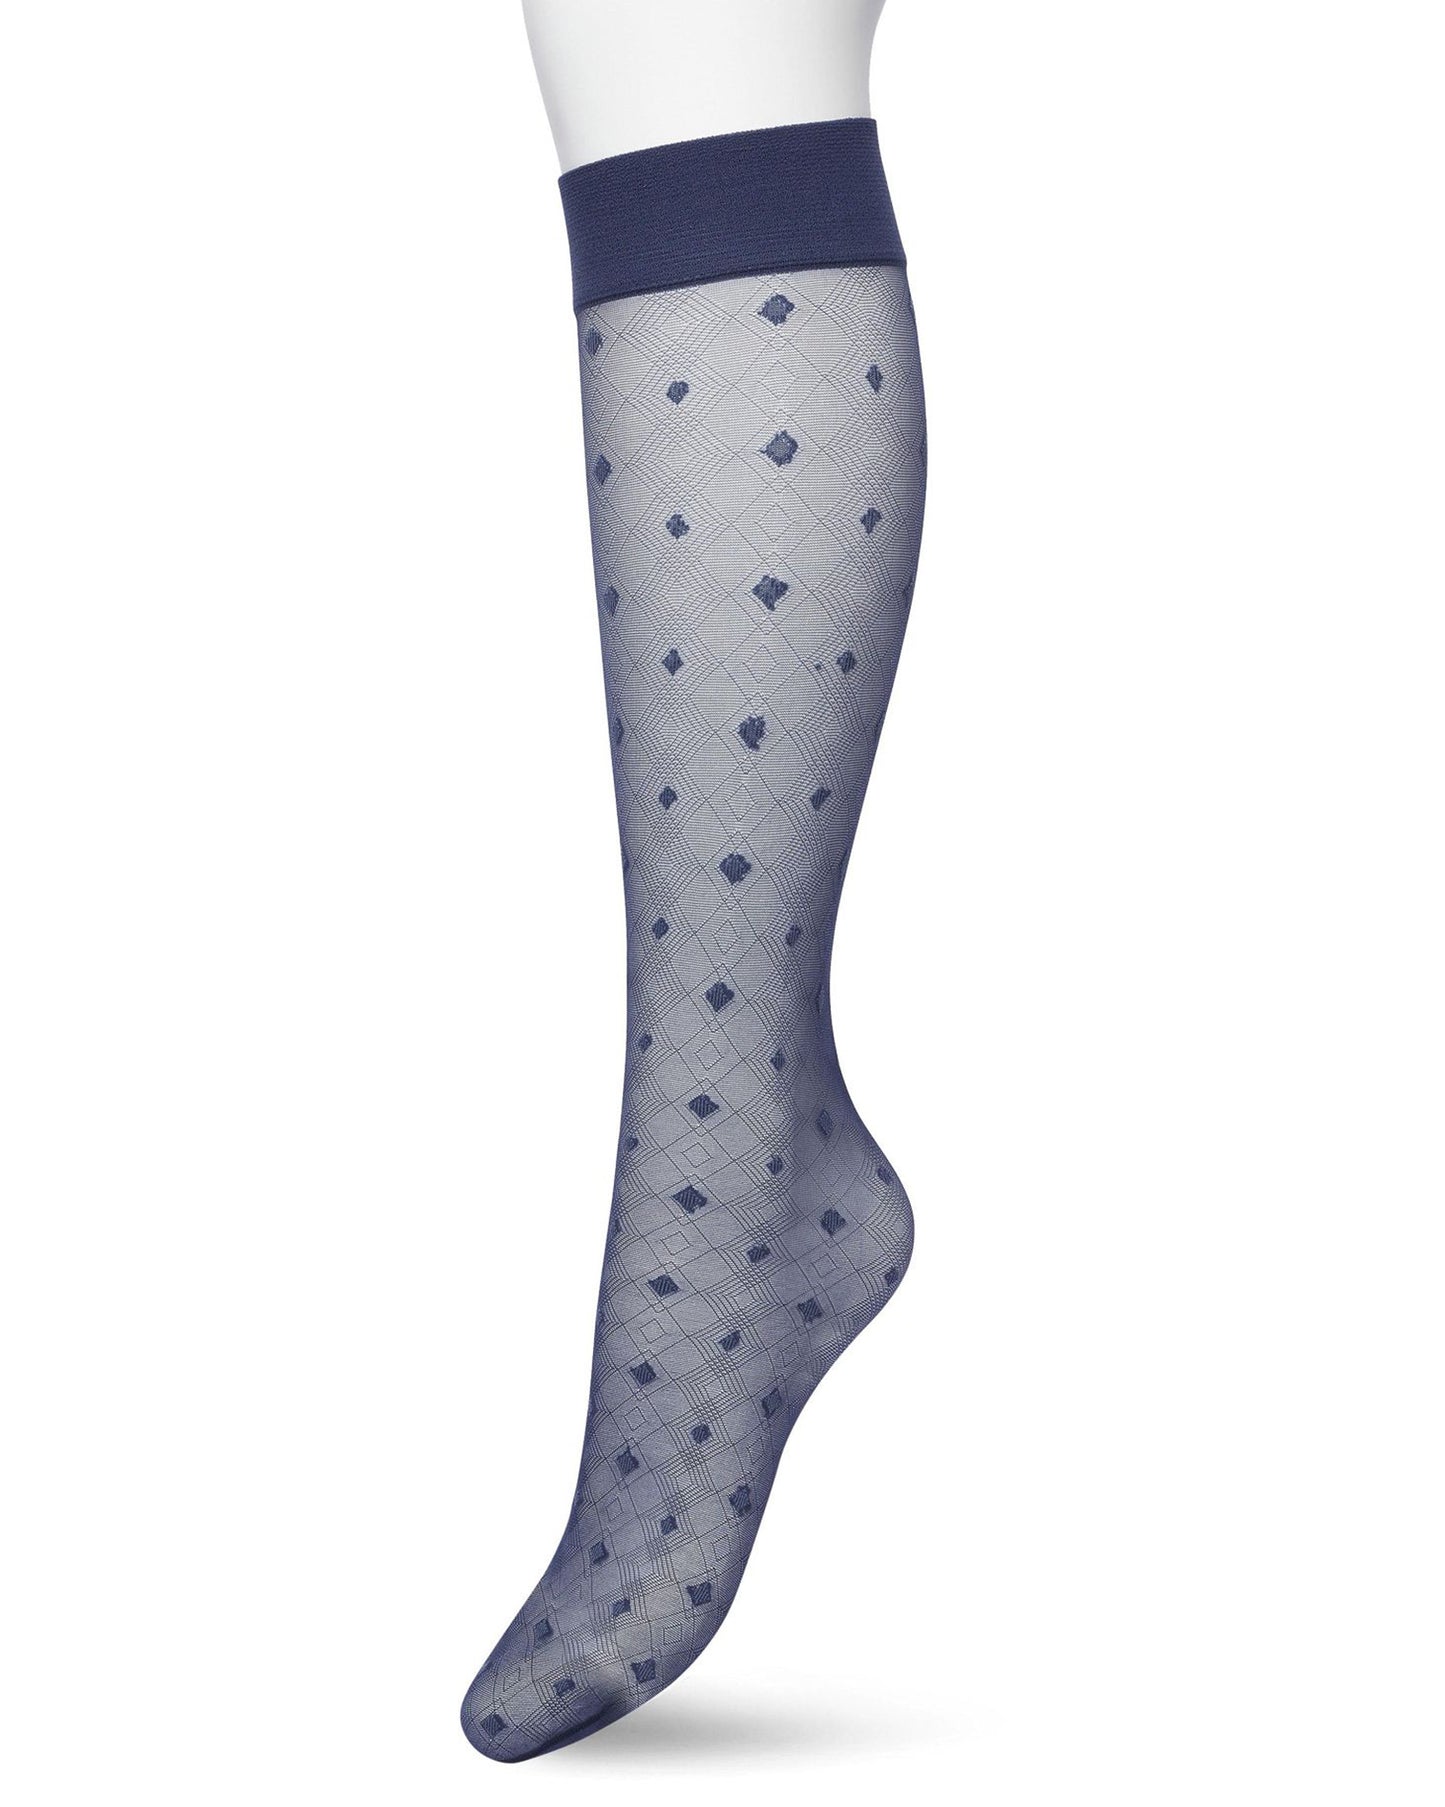 Bonnie Doon Geometric Knee-Highs - Sheer navy blue fashion knee-high socks with a geometric linear diamond pattern with opaque dotted diamonds and deep elasticated comfort cuff